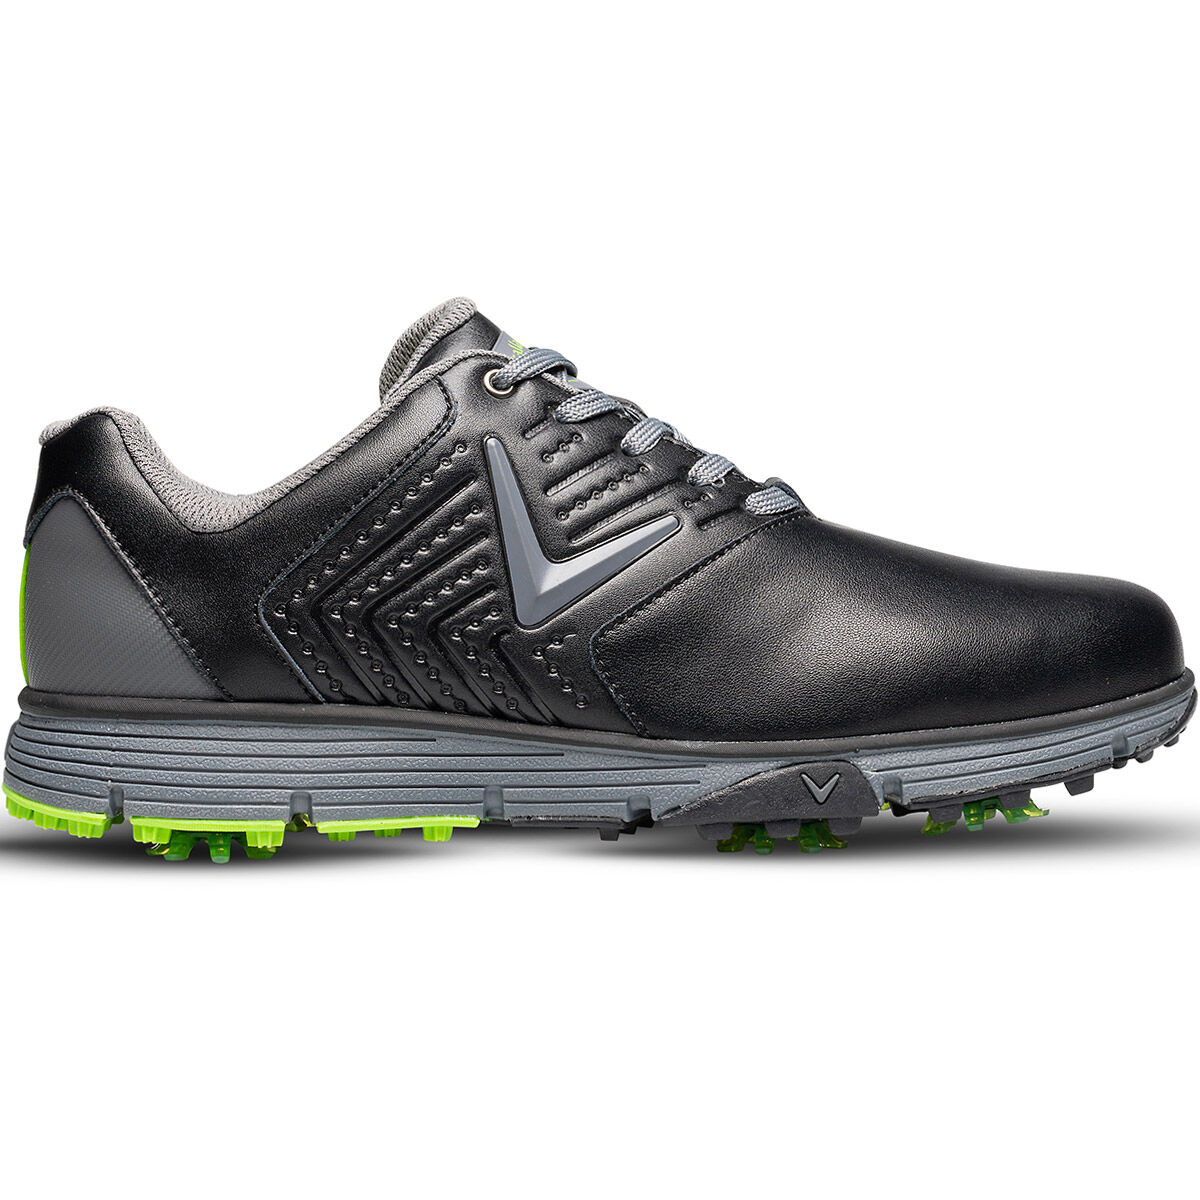 Callaway Golf Mulligan S Shoes from 